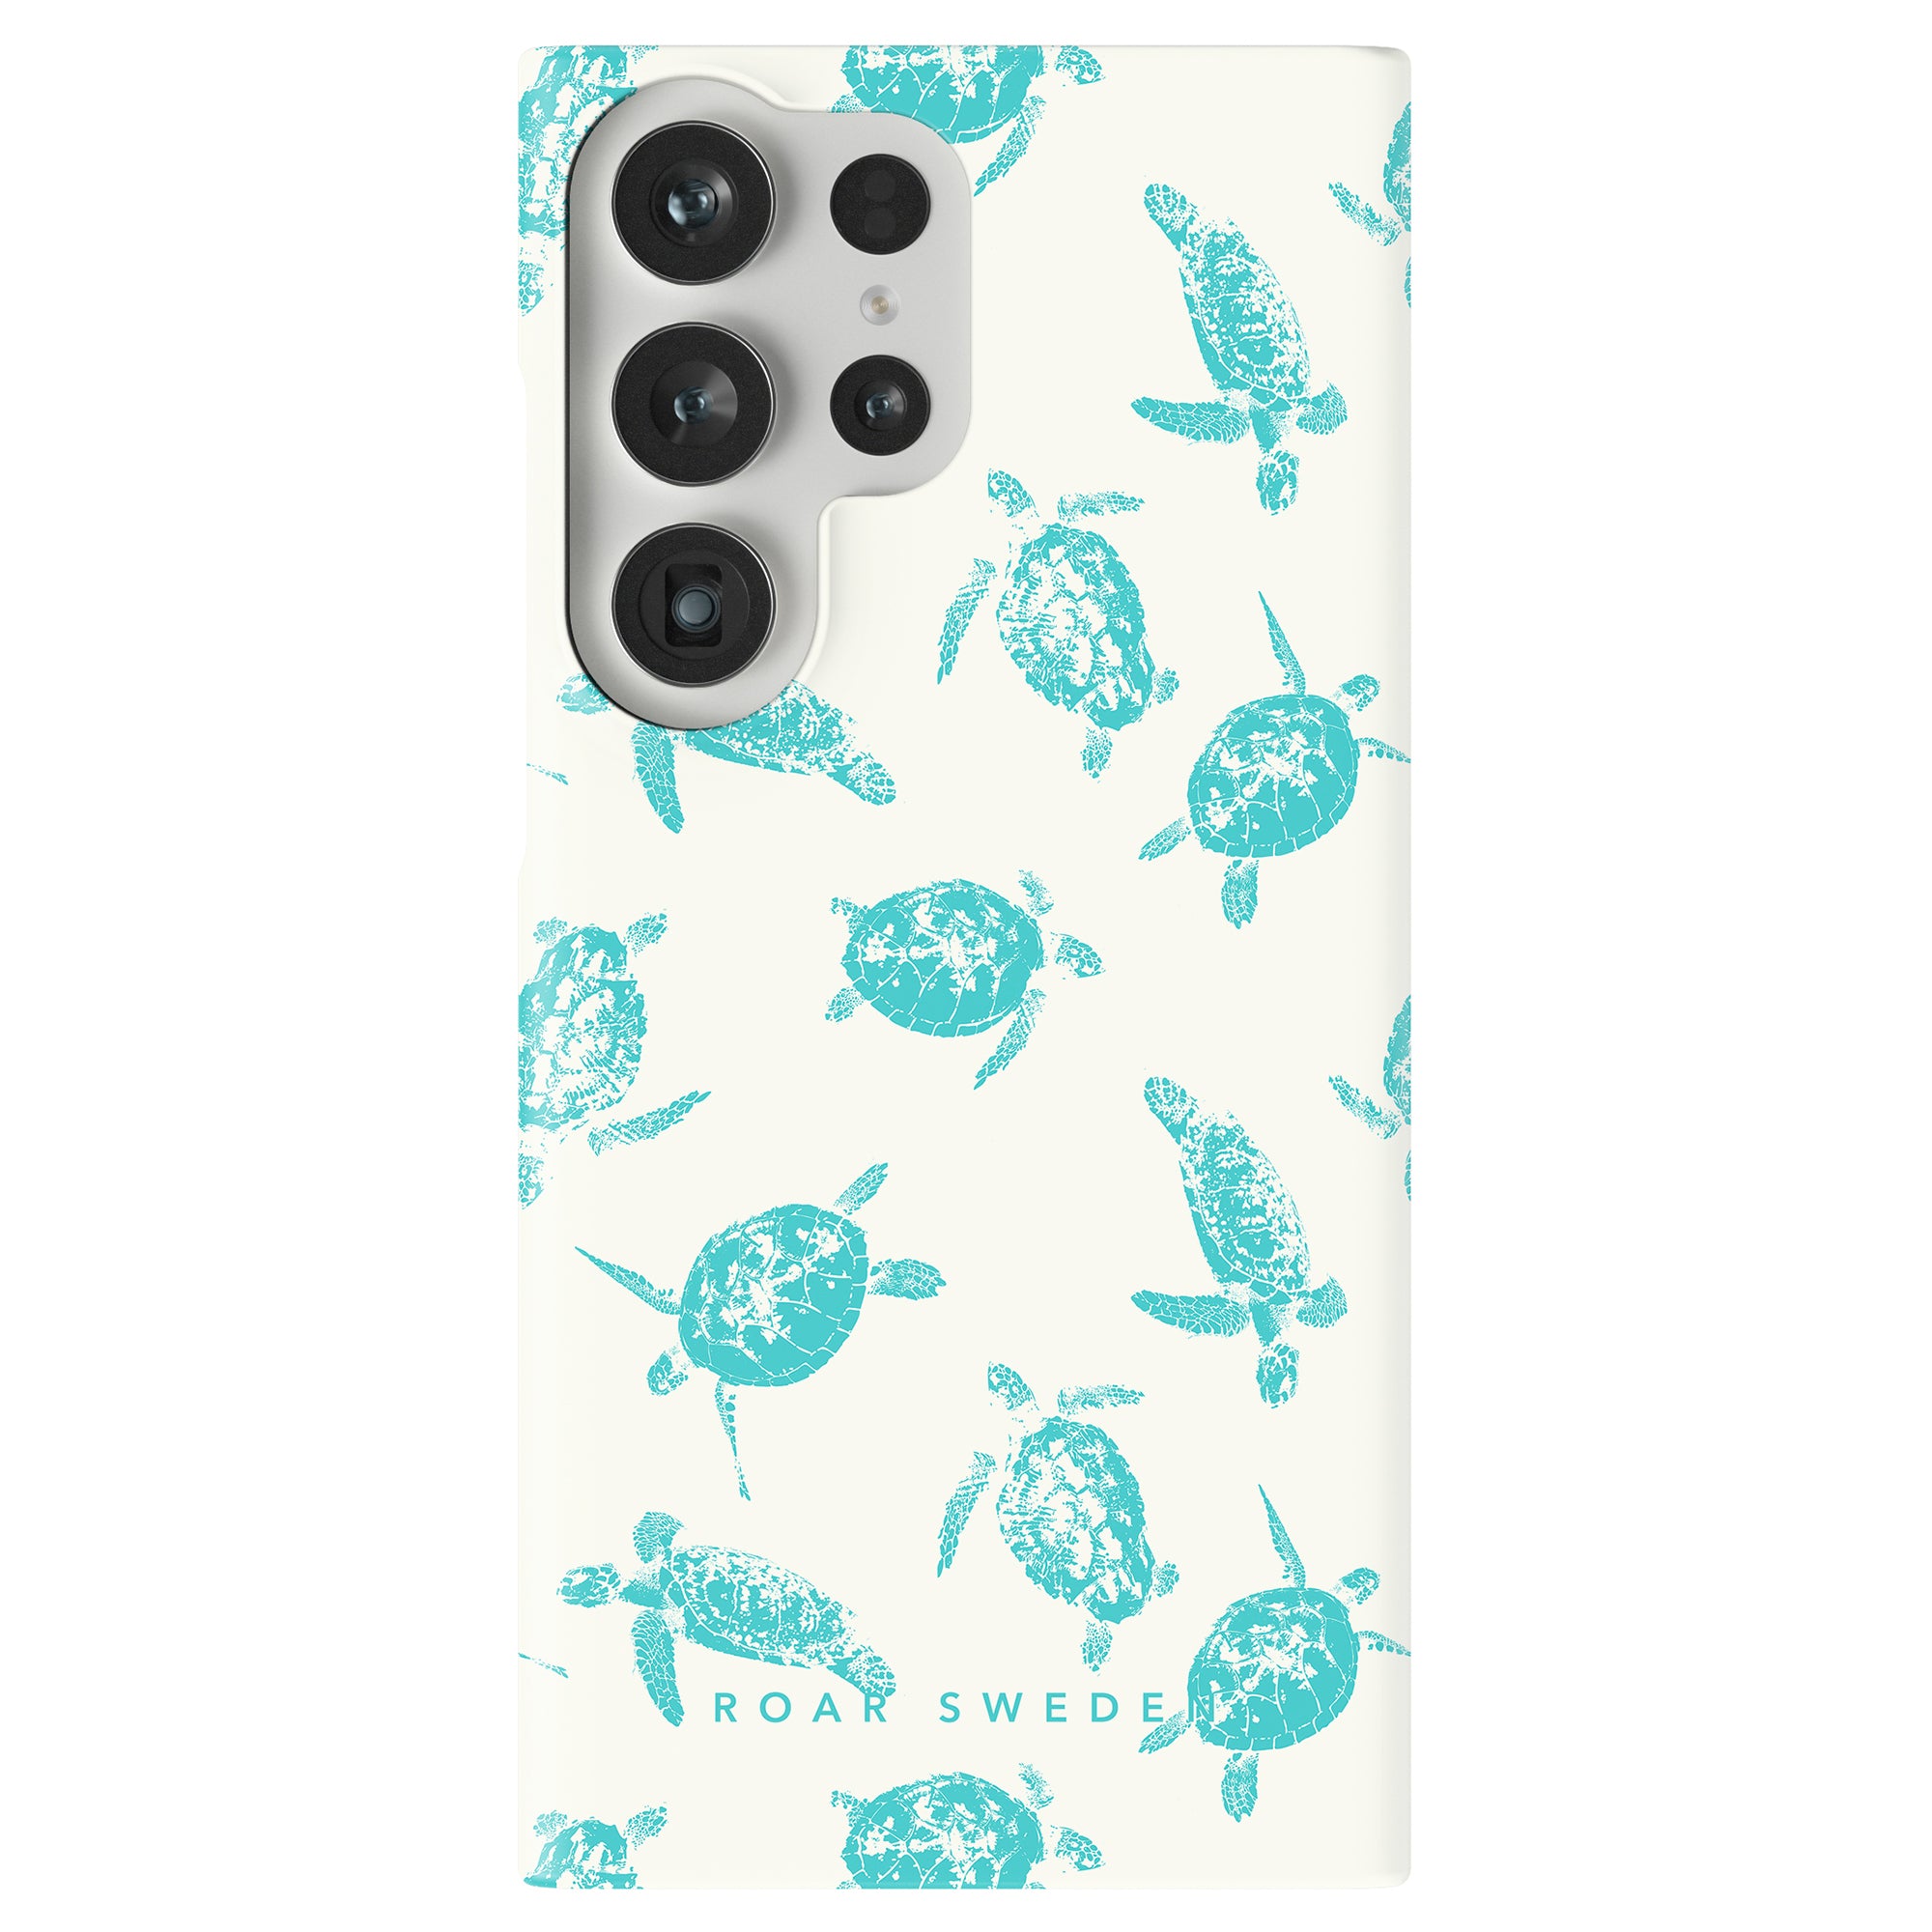 A smartphone with a Sea Turtles - Slim case and a triple-lens camera, featuring nourishing ingredients.